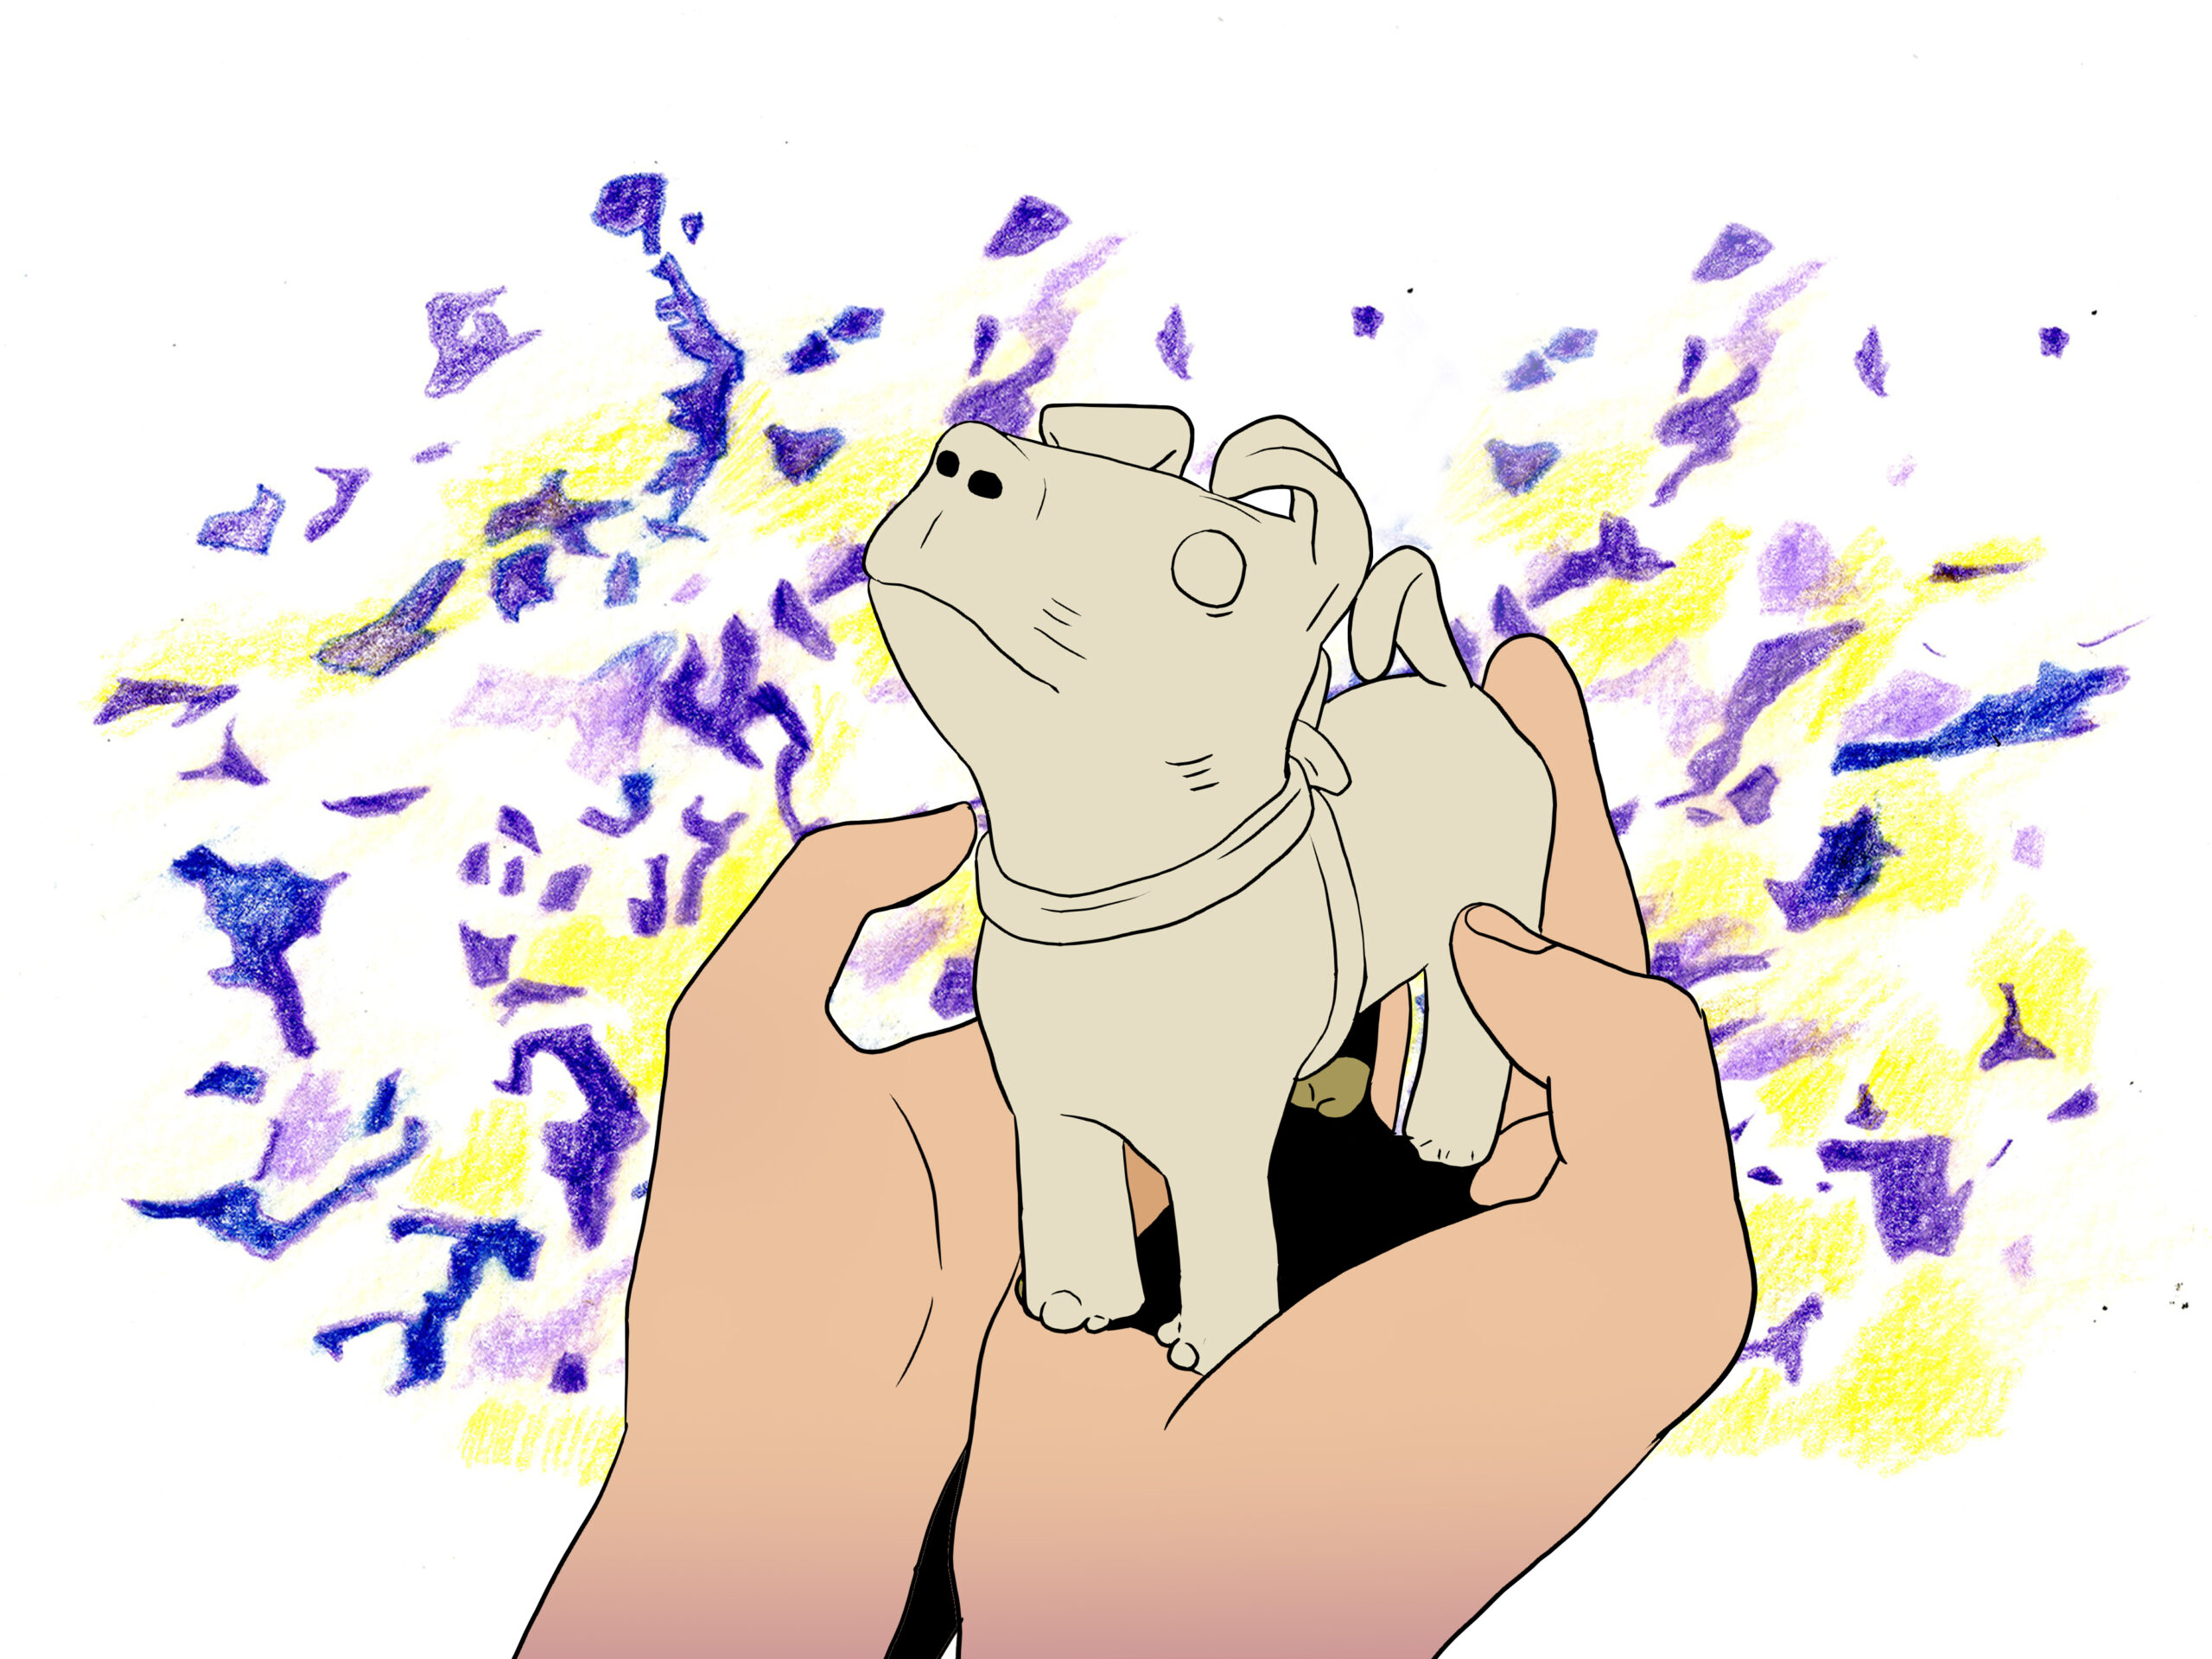 Drawing of light brown hands holding a cream ceramic statue of a dog above abstract purple and yellow shapes